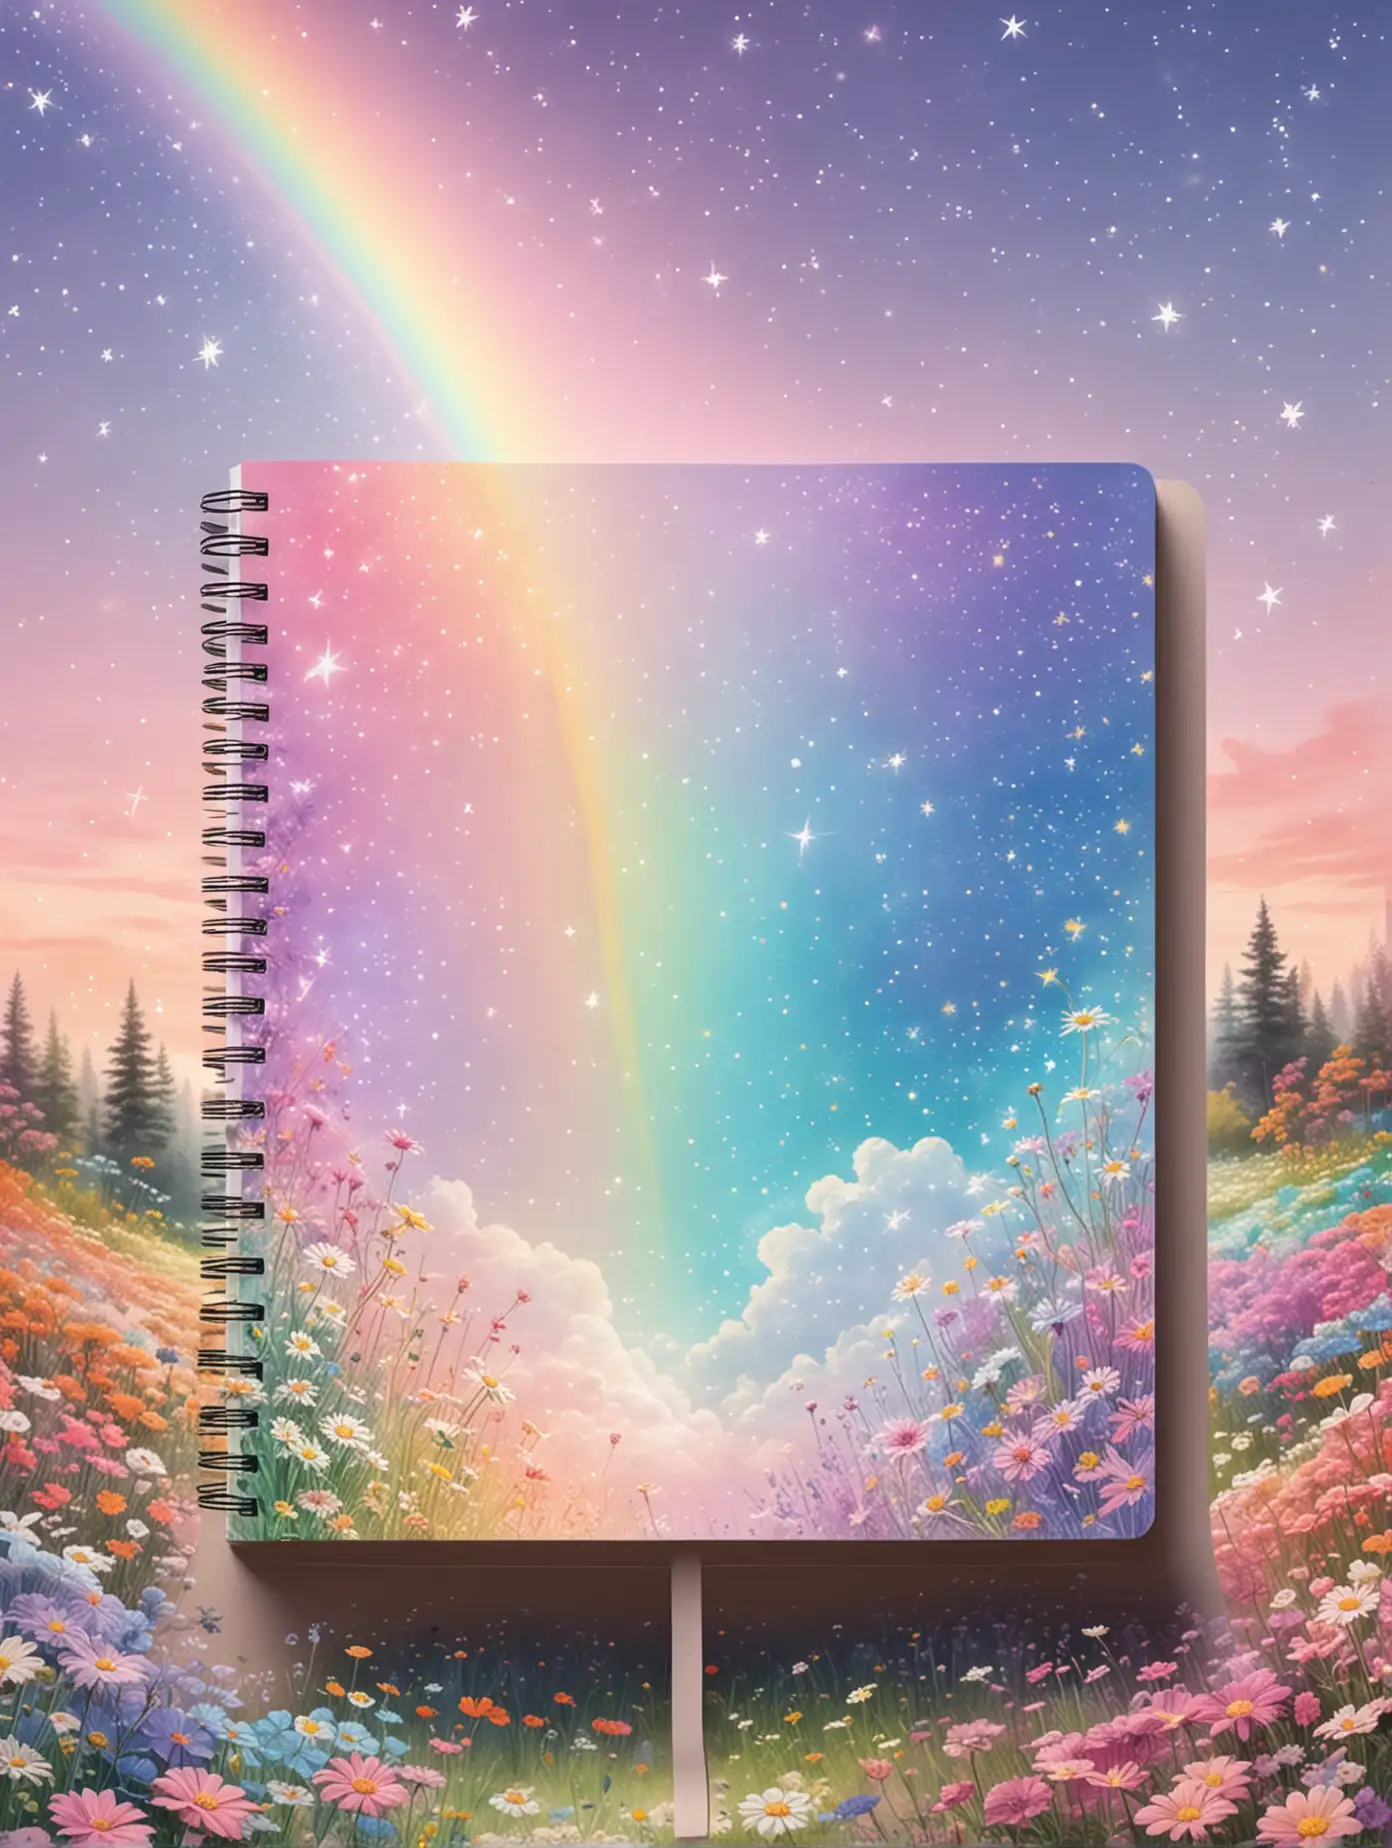 Pastel Rainbow Garden Notebook Opening Portal to Magical Starry Sky